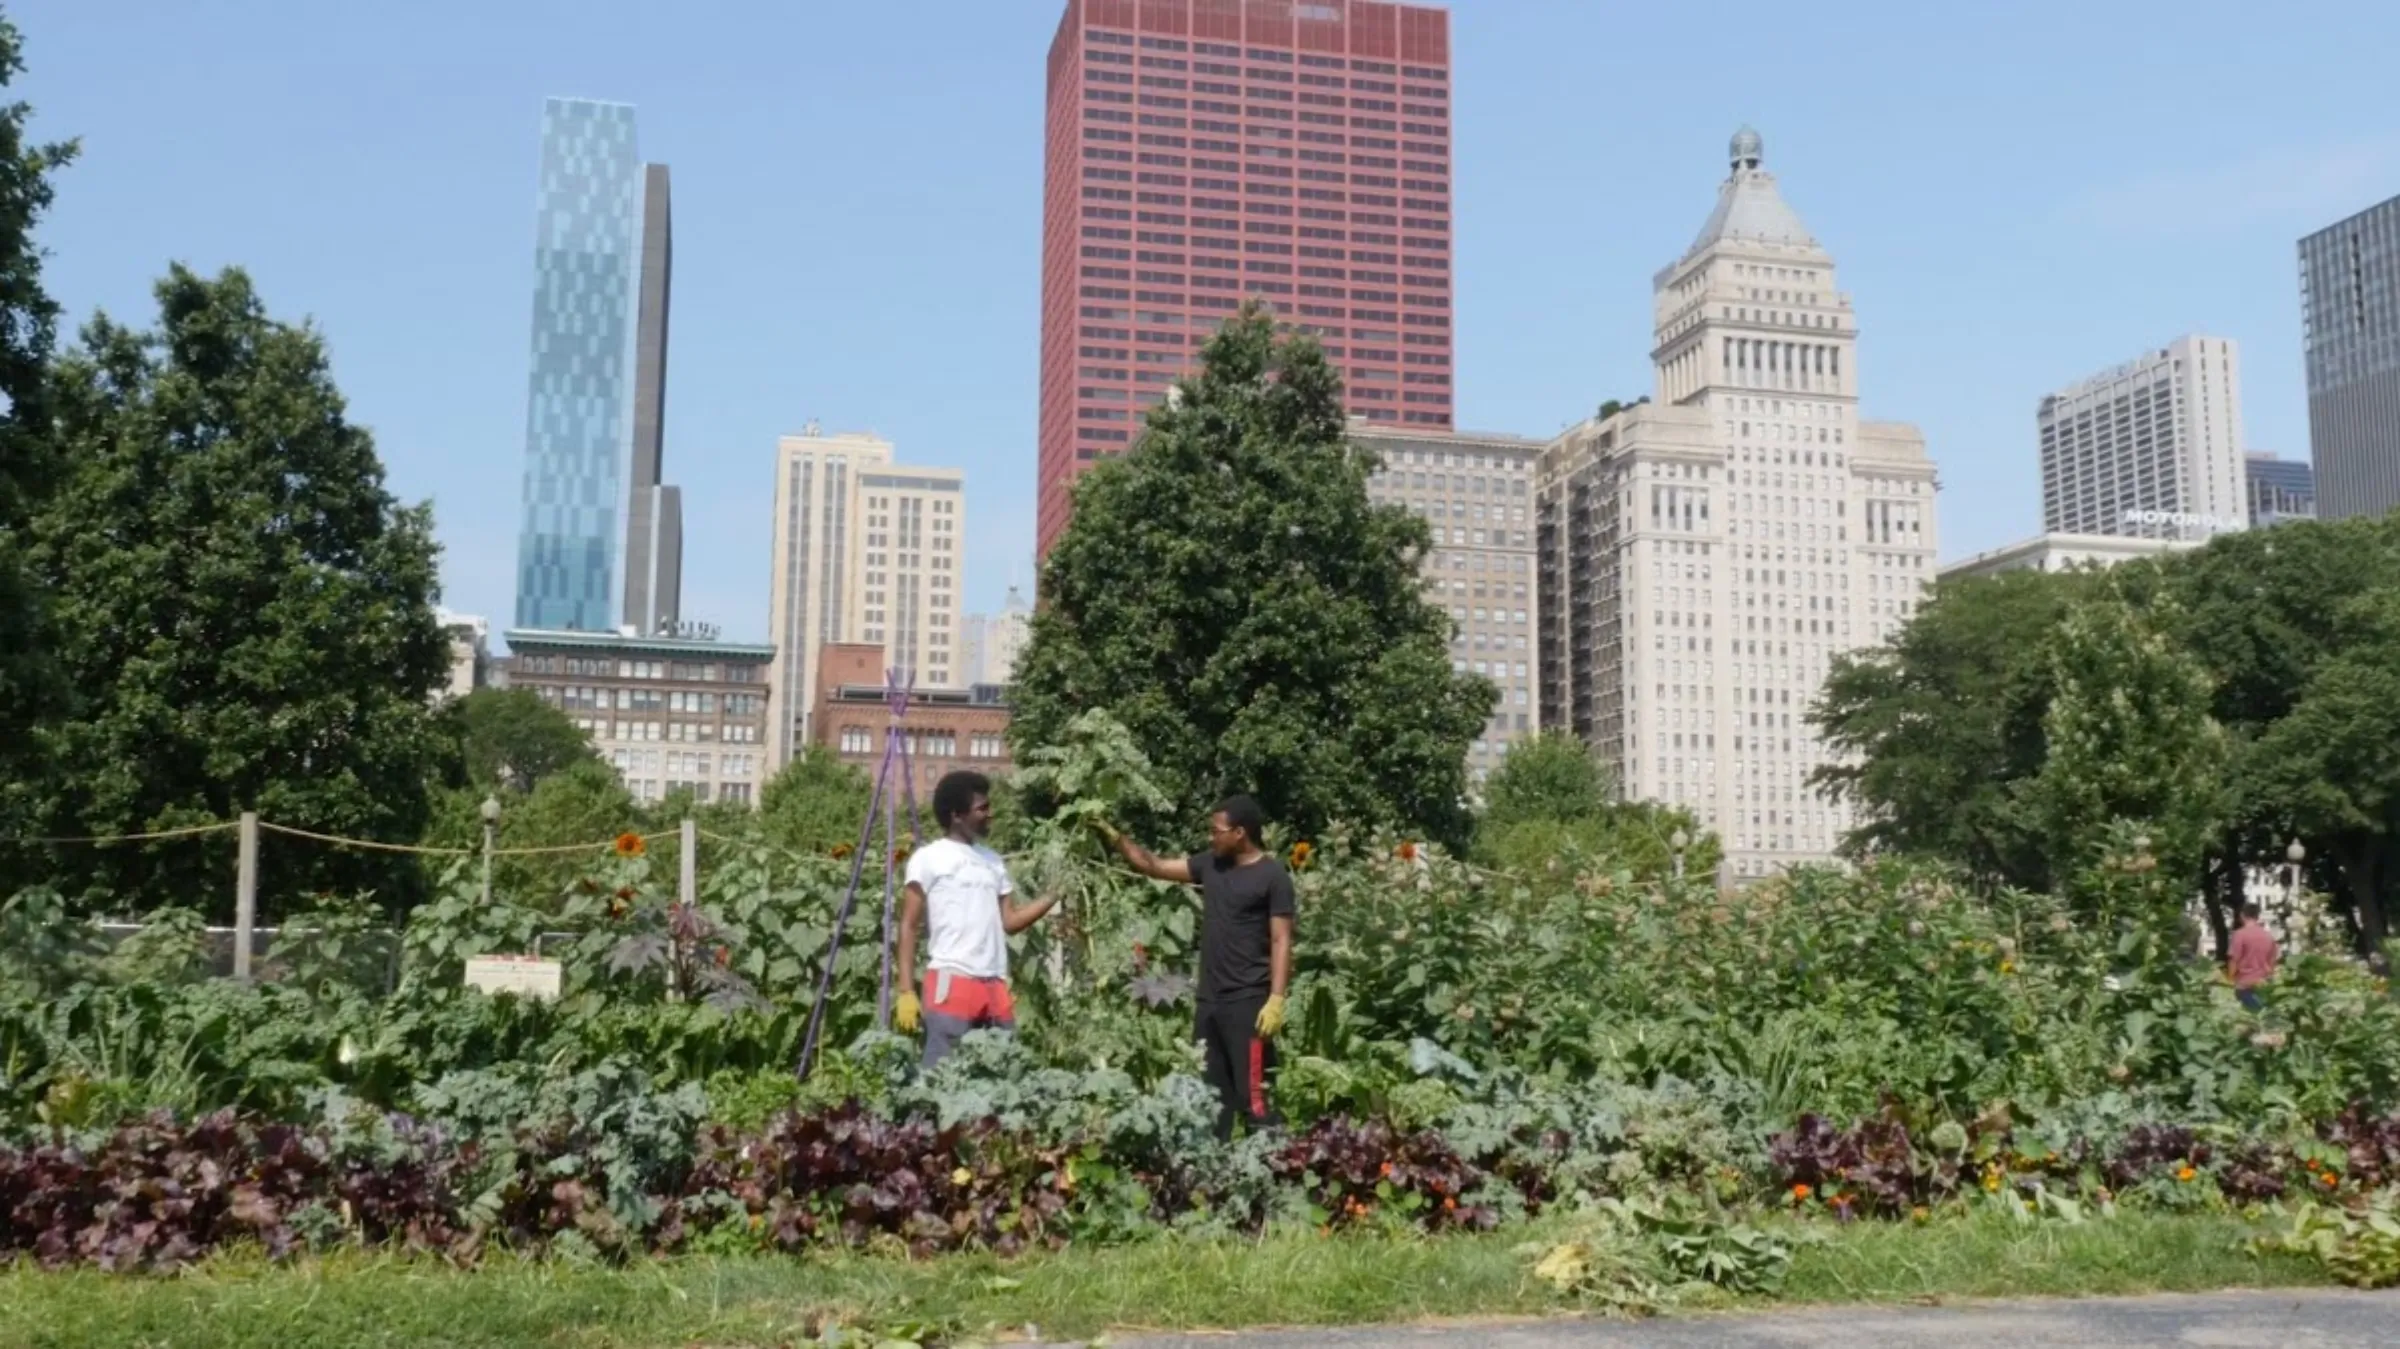 Volunteers and staff from Urban Growers Collective working at the Grant Park Farm located in the heart of downtown Chicago